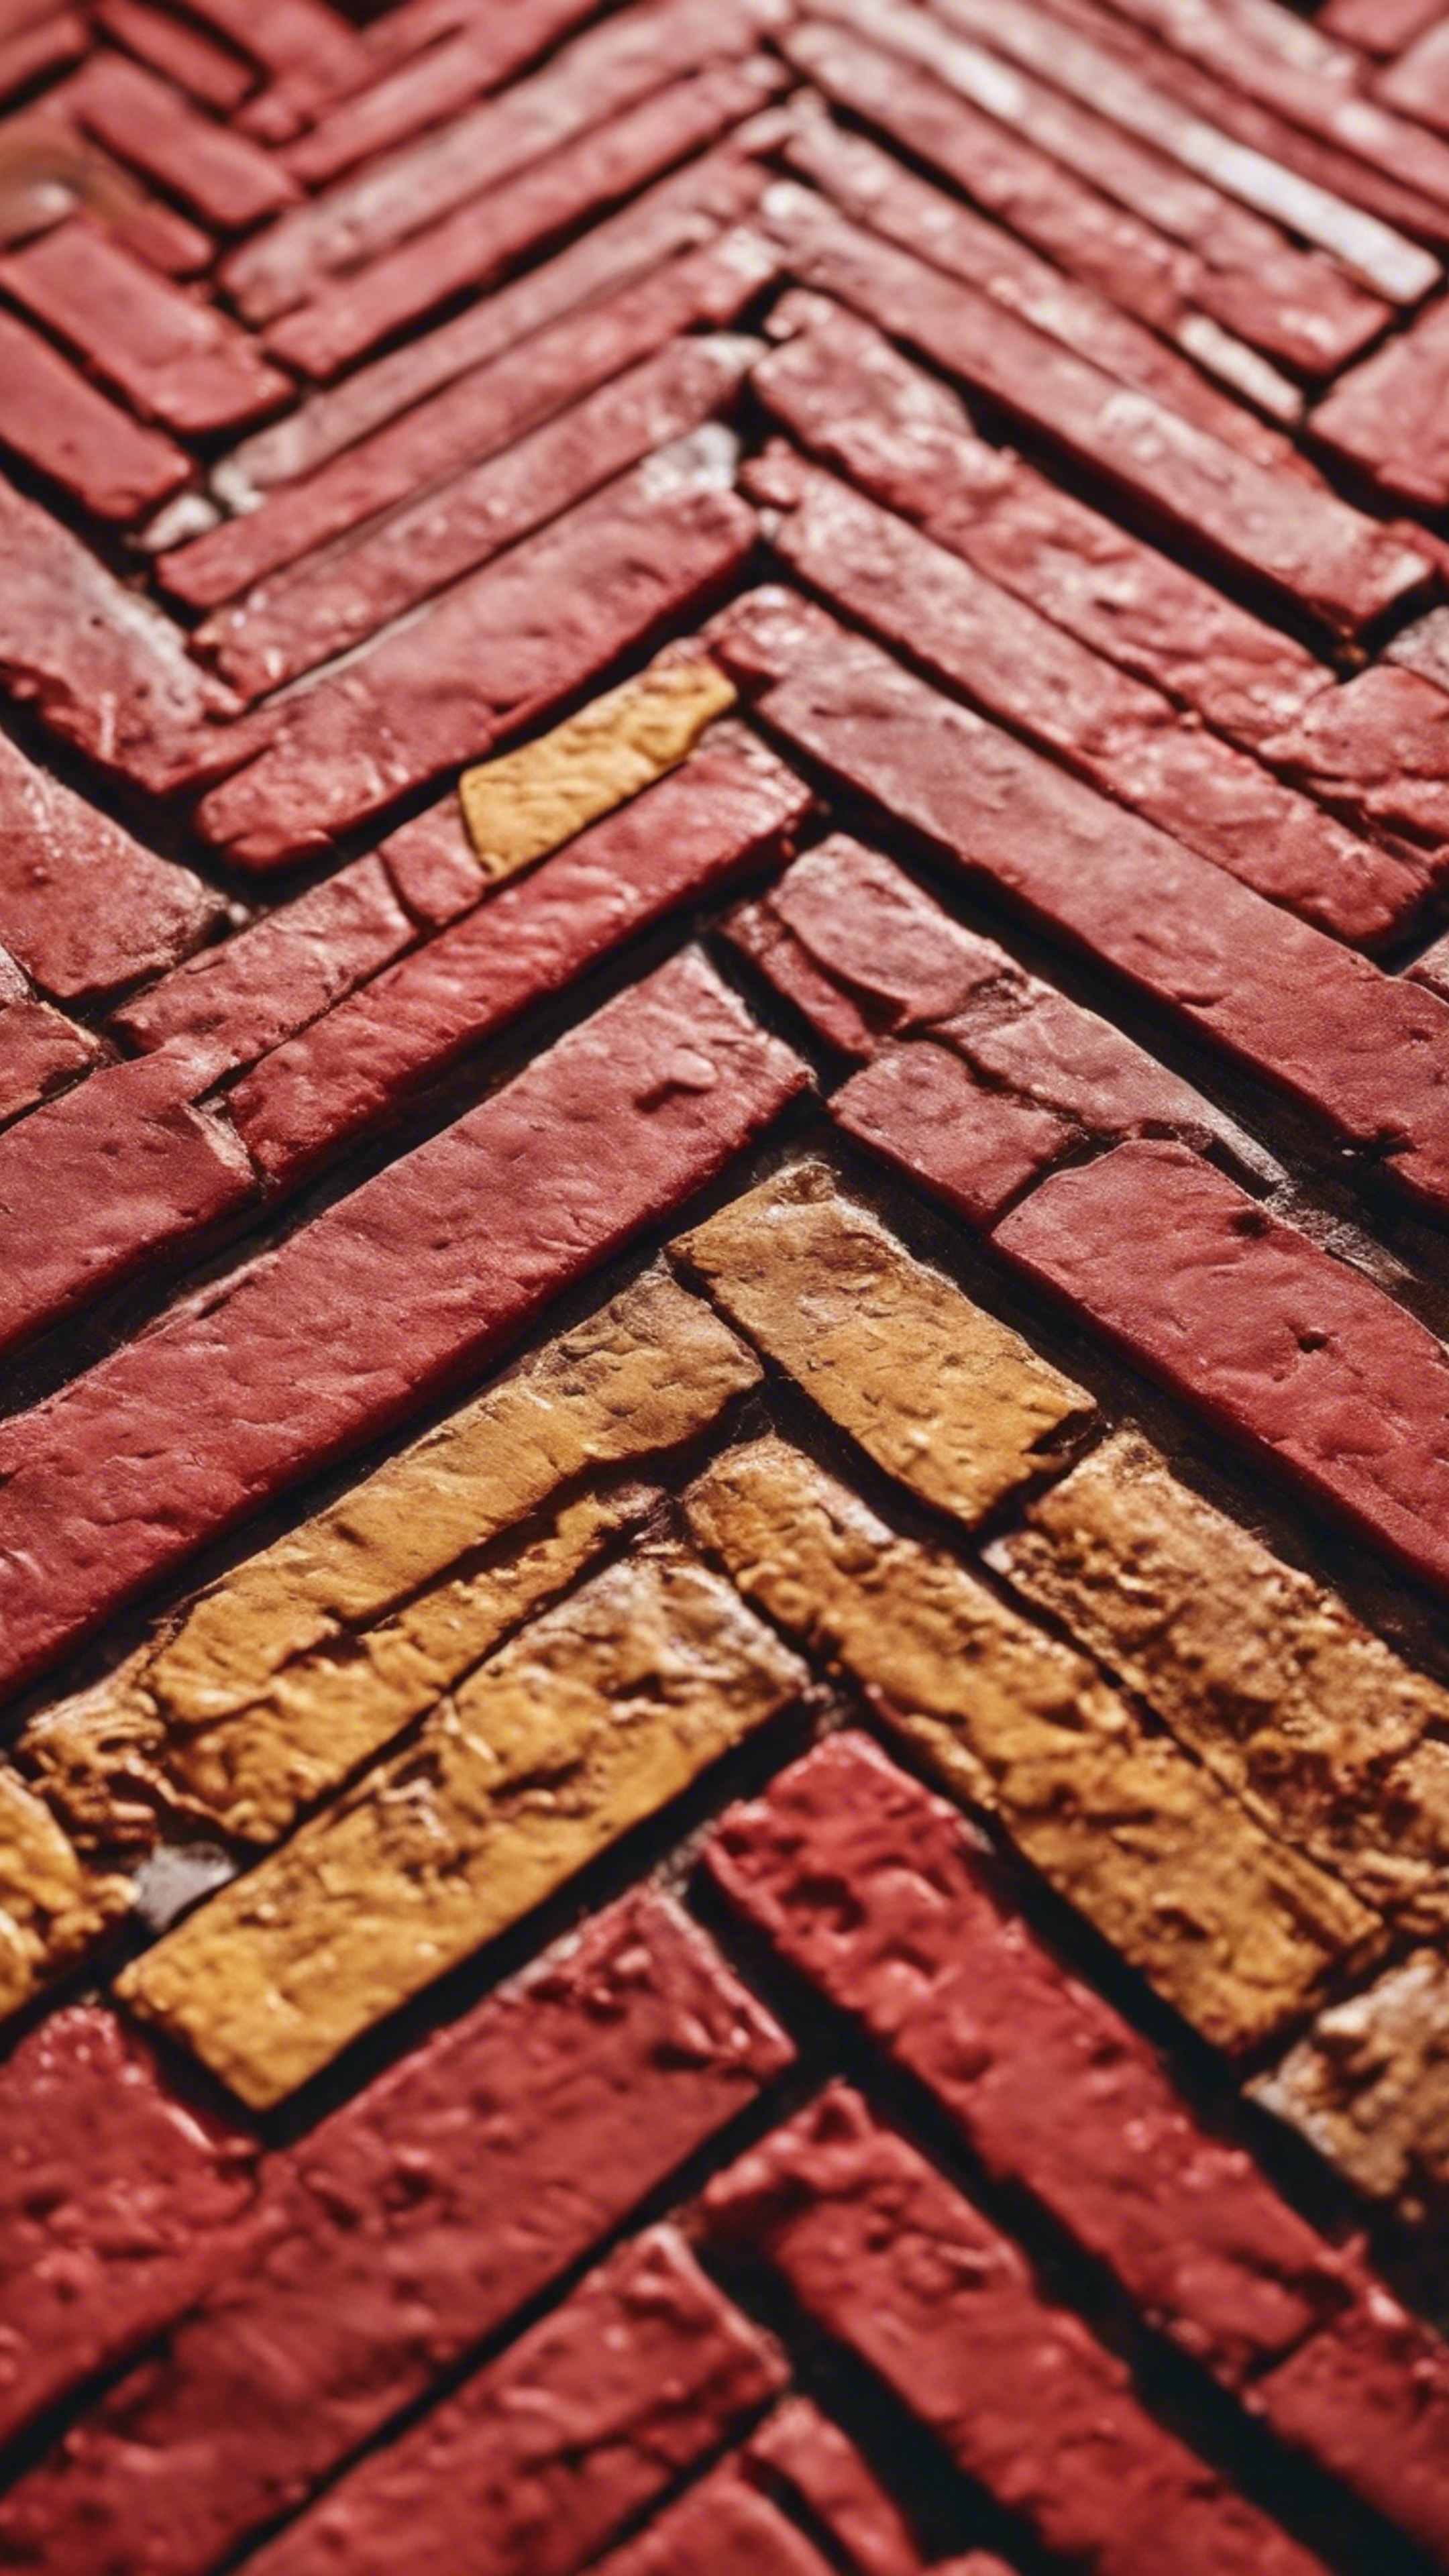 A pathway comprising a herringbone pattern using bricks in shades of red and yellow. Тапет[fb3238611eed4691b5b0]